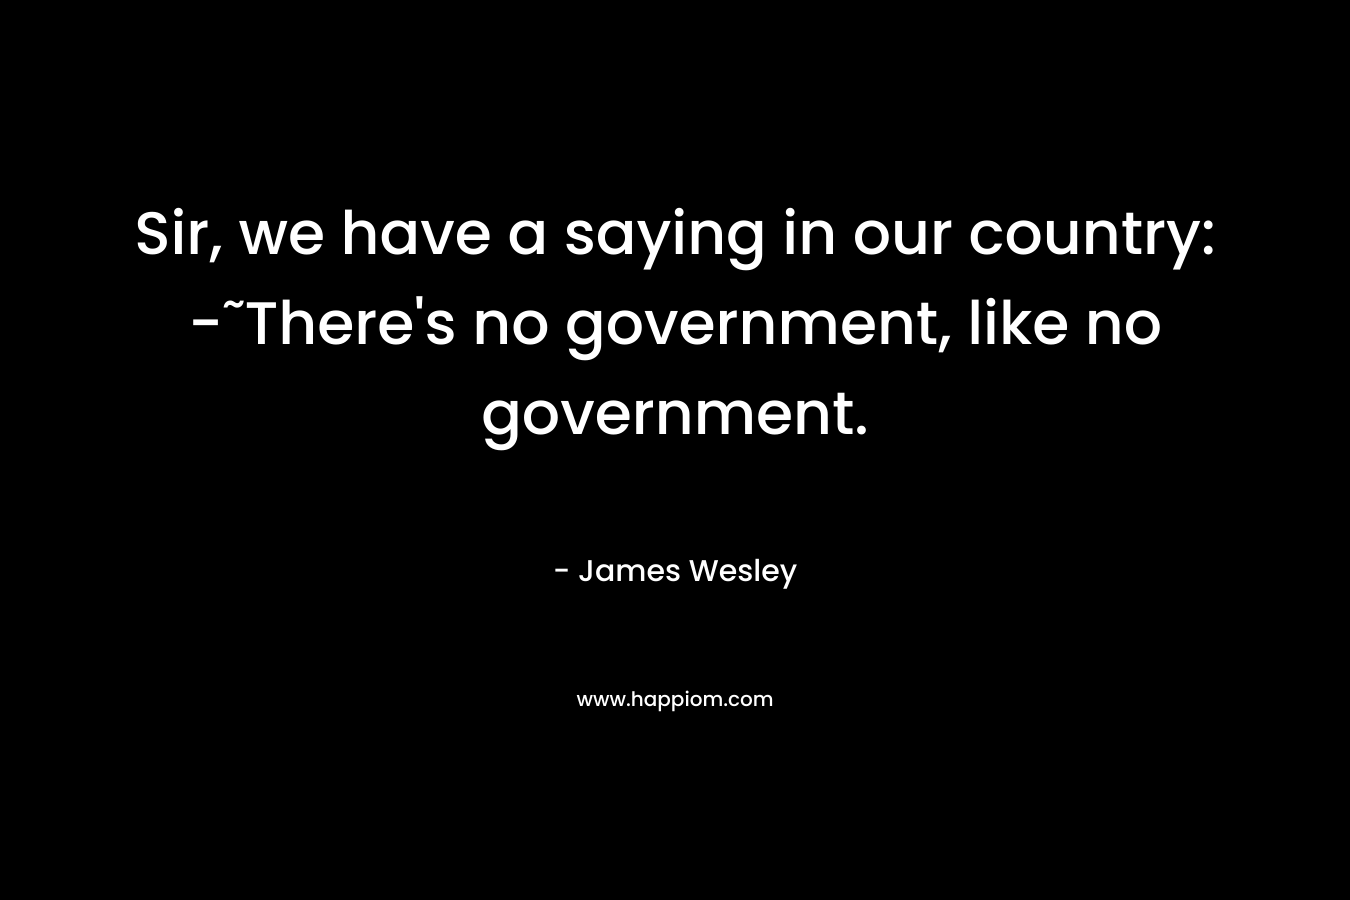 Sir, we have a saying in our country: -˜There's no government, like no government.